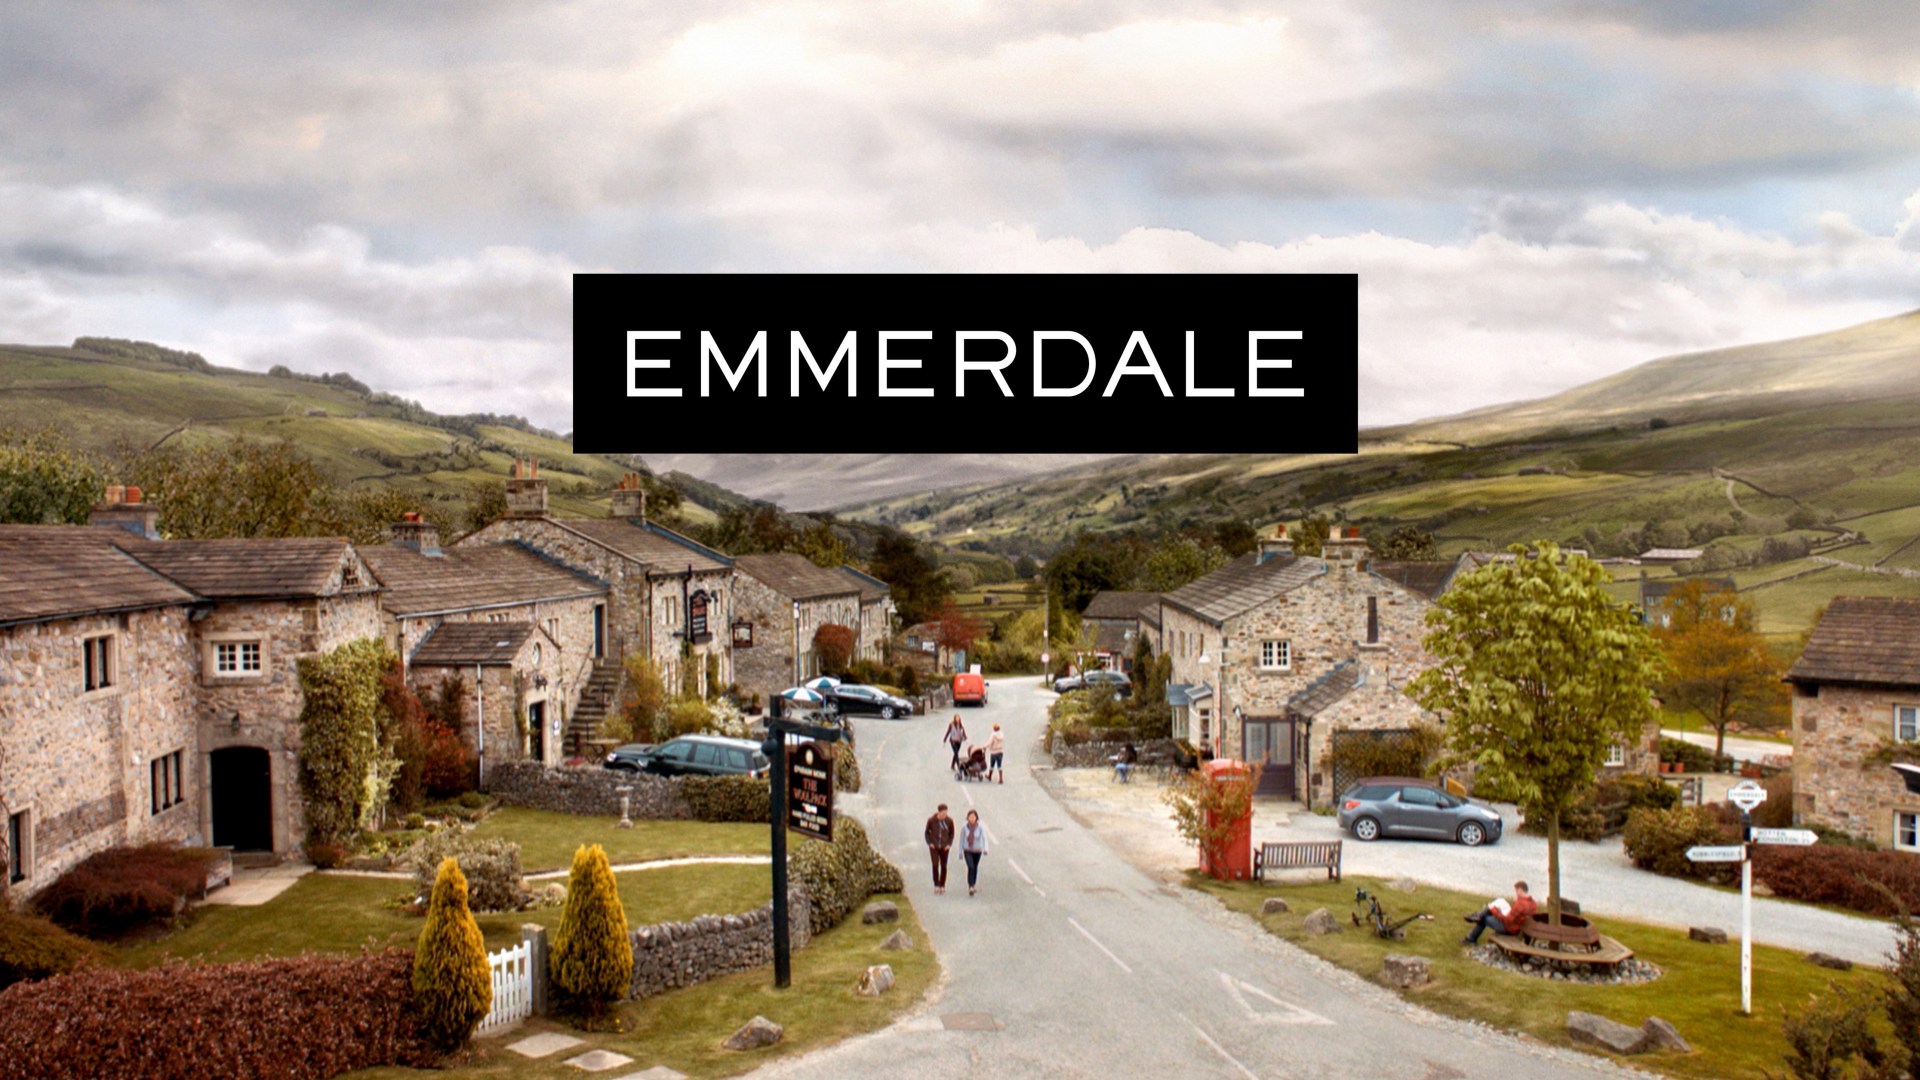 ‘I’ll miss this’ sighs Emmerdale favourite as they reveal sudden plans to leave village after major ordeal [Video]